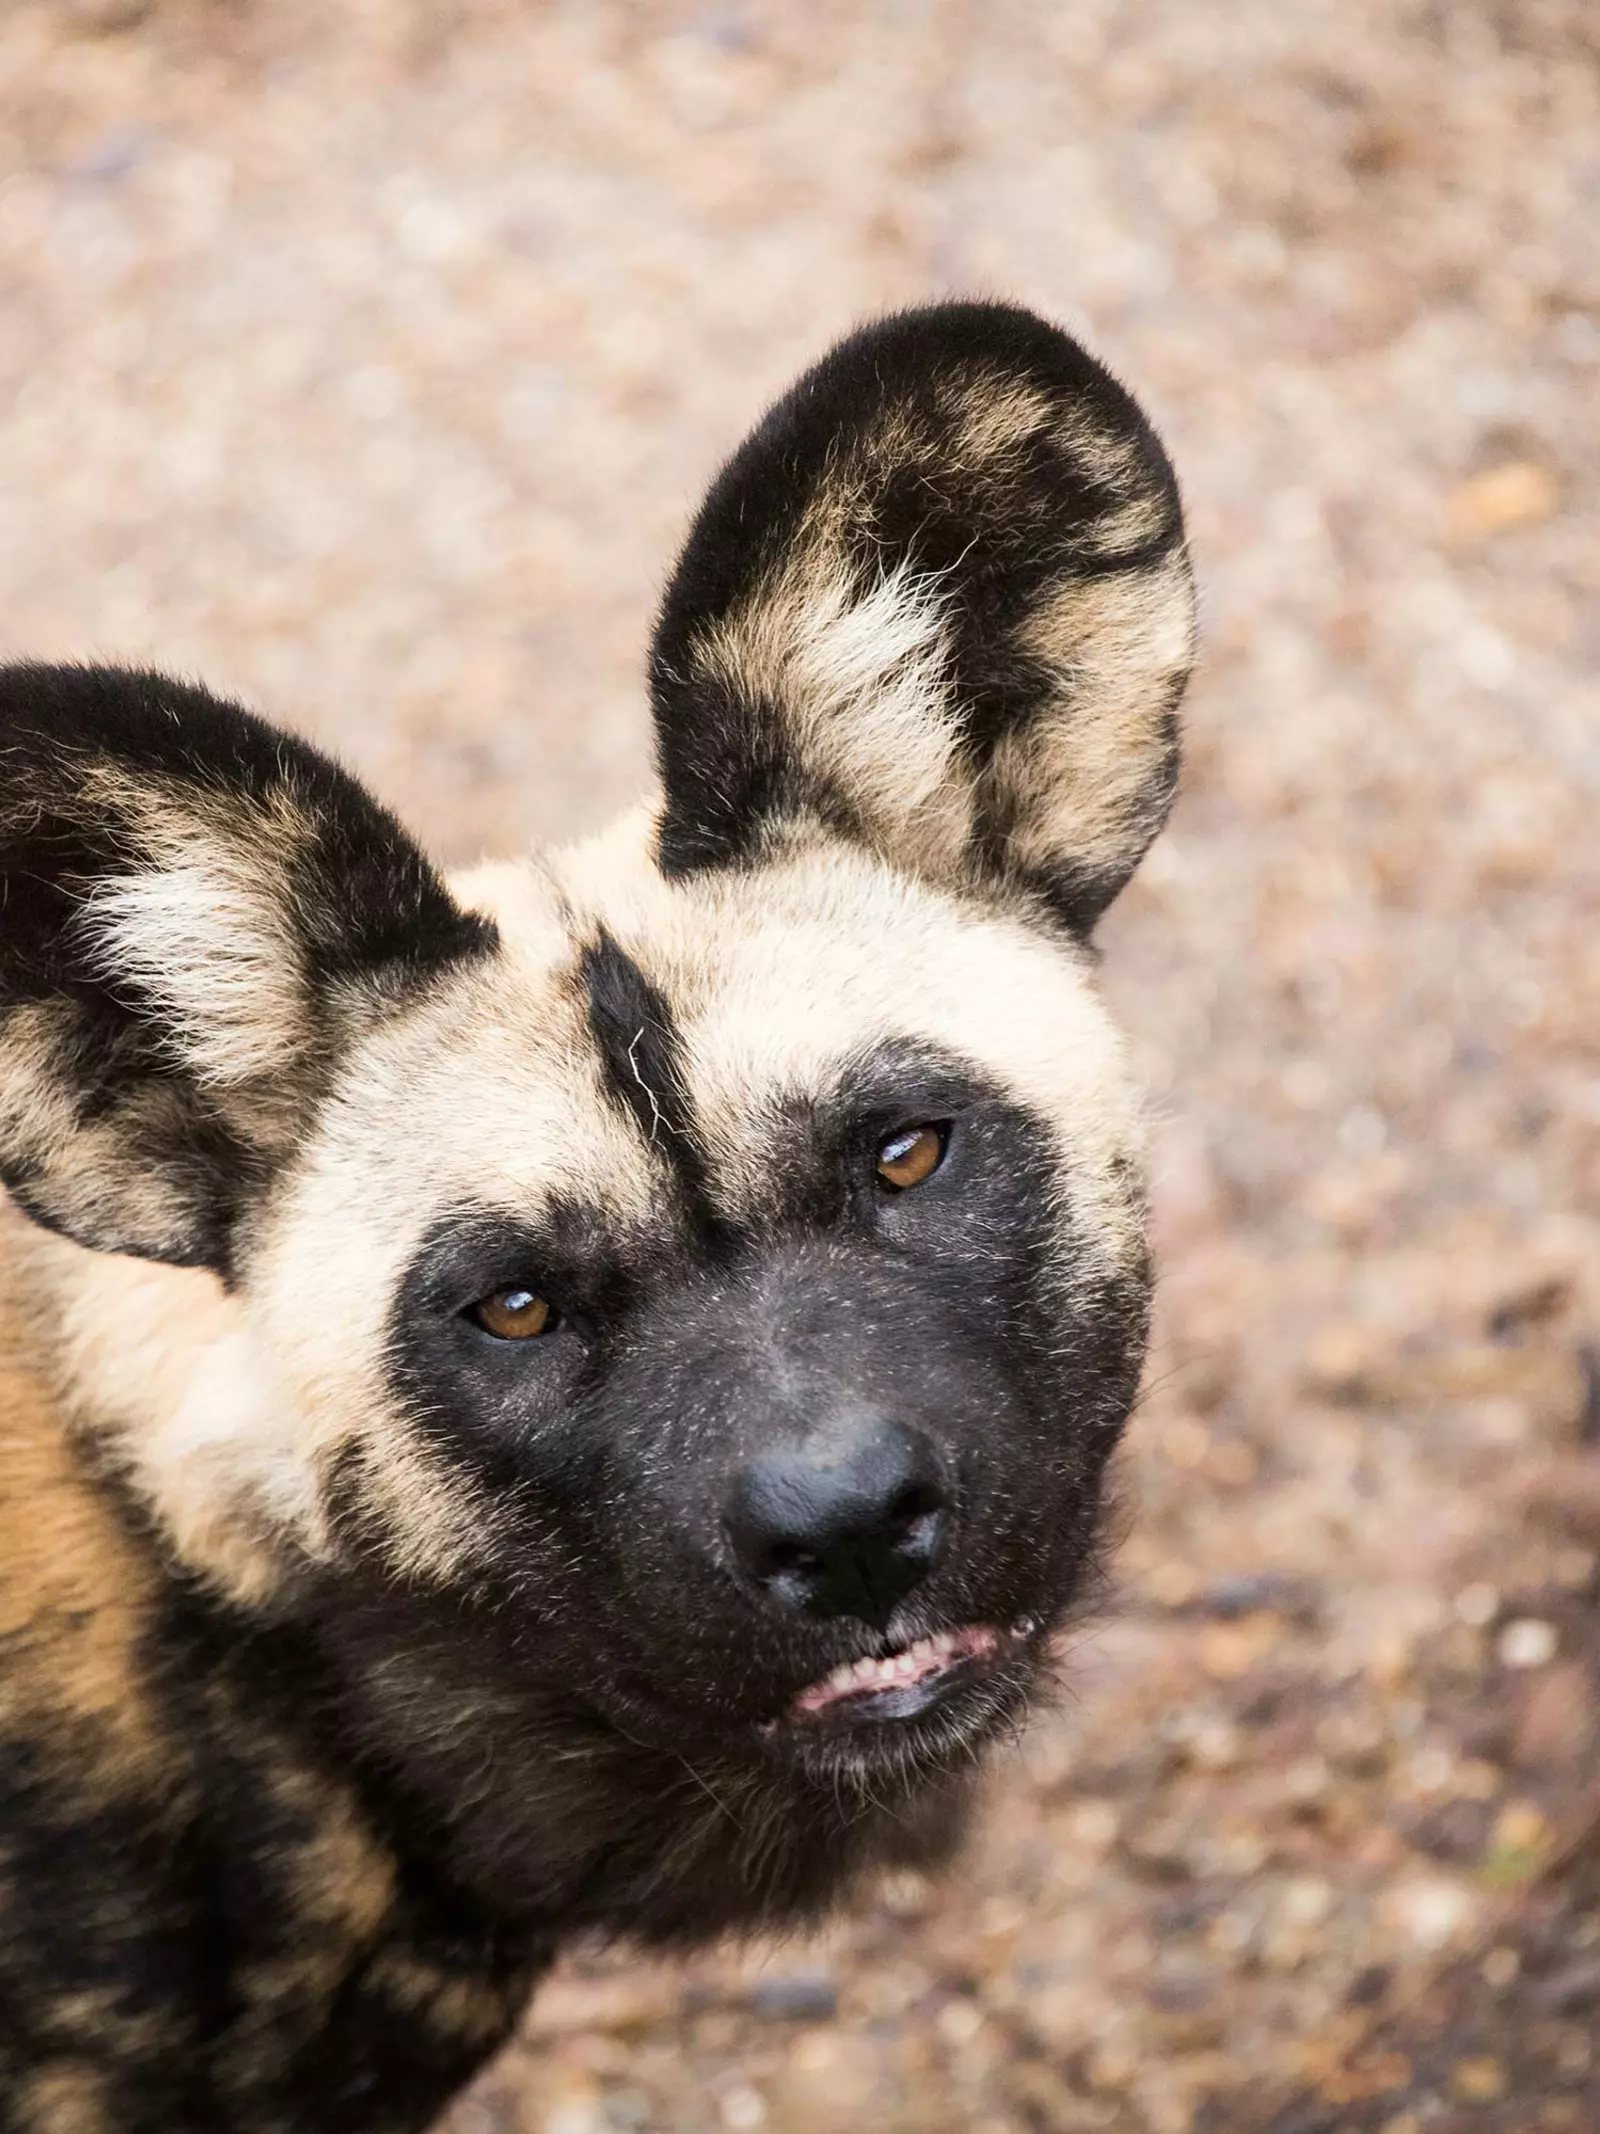 African wild dog at London Zoo looking up